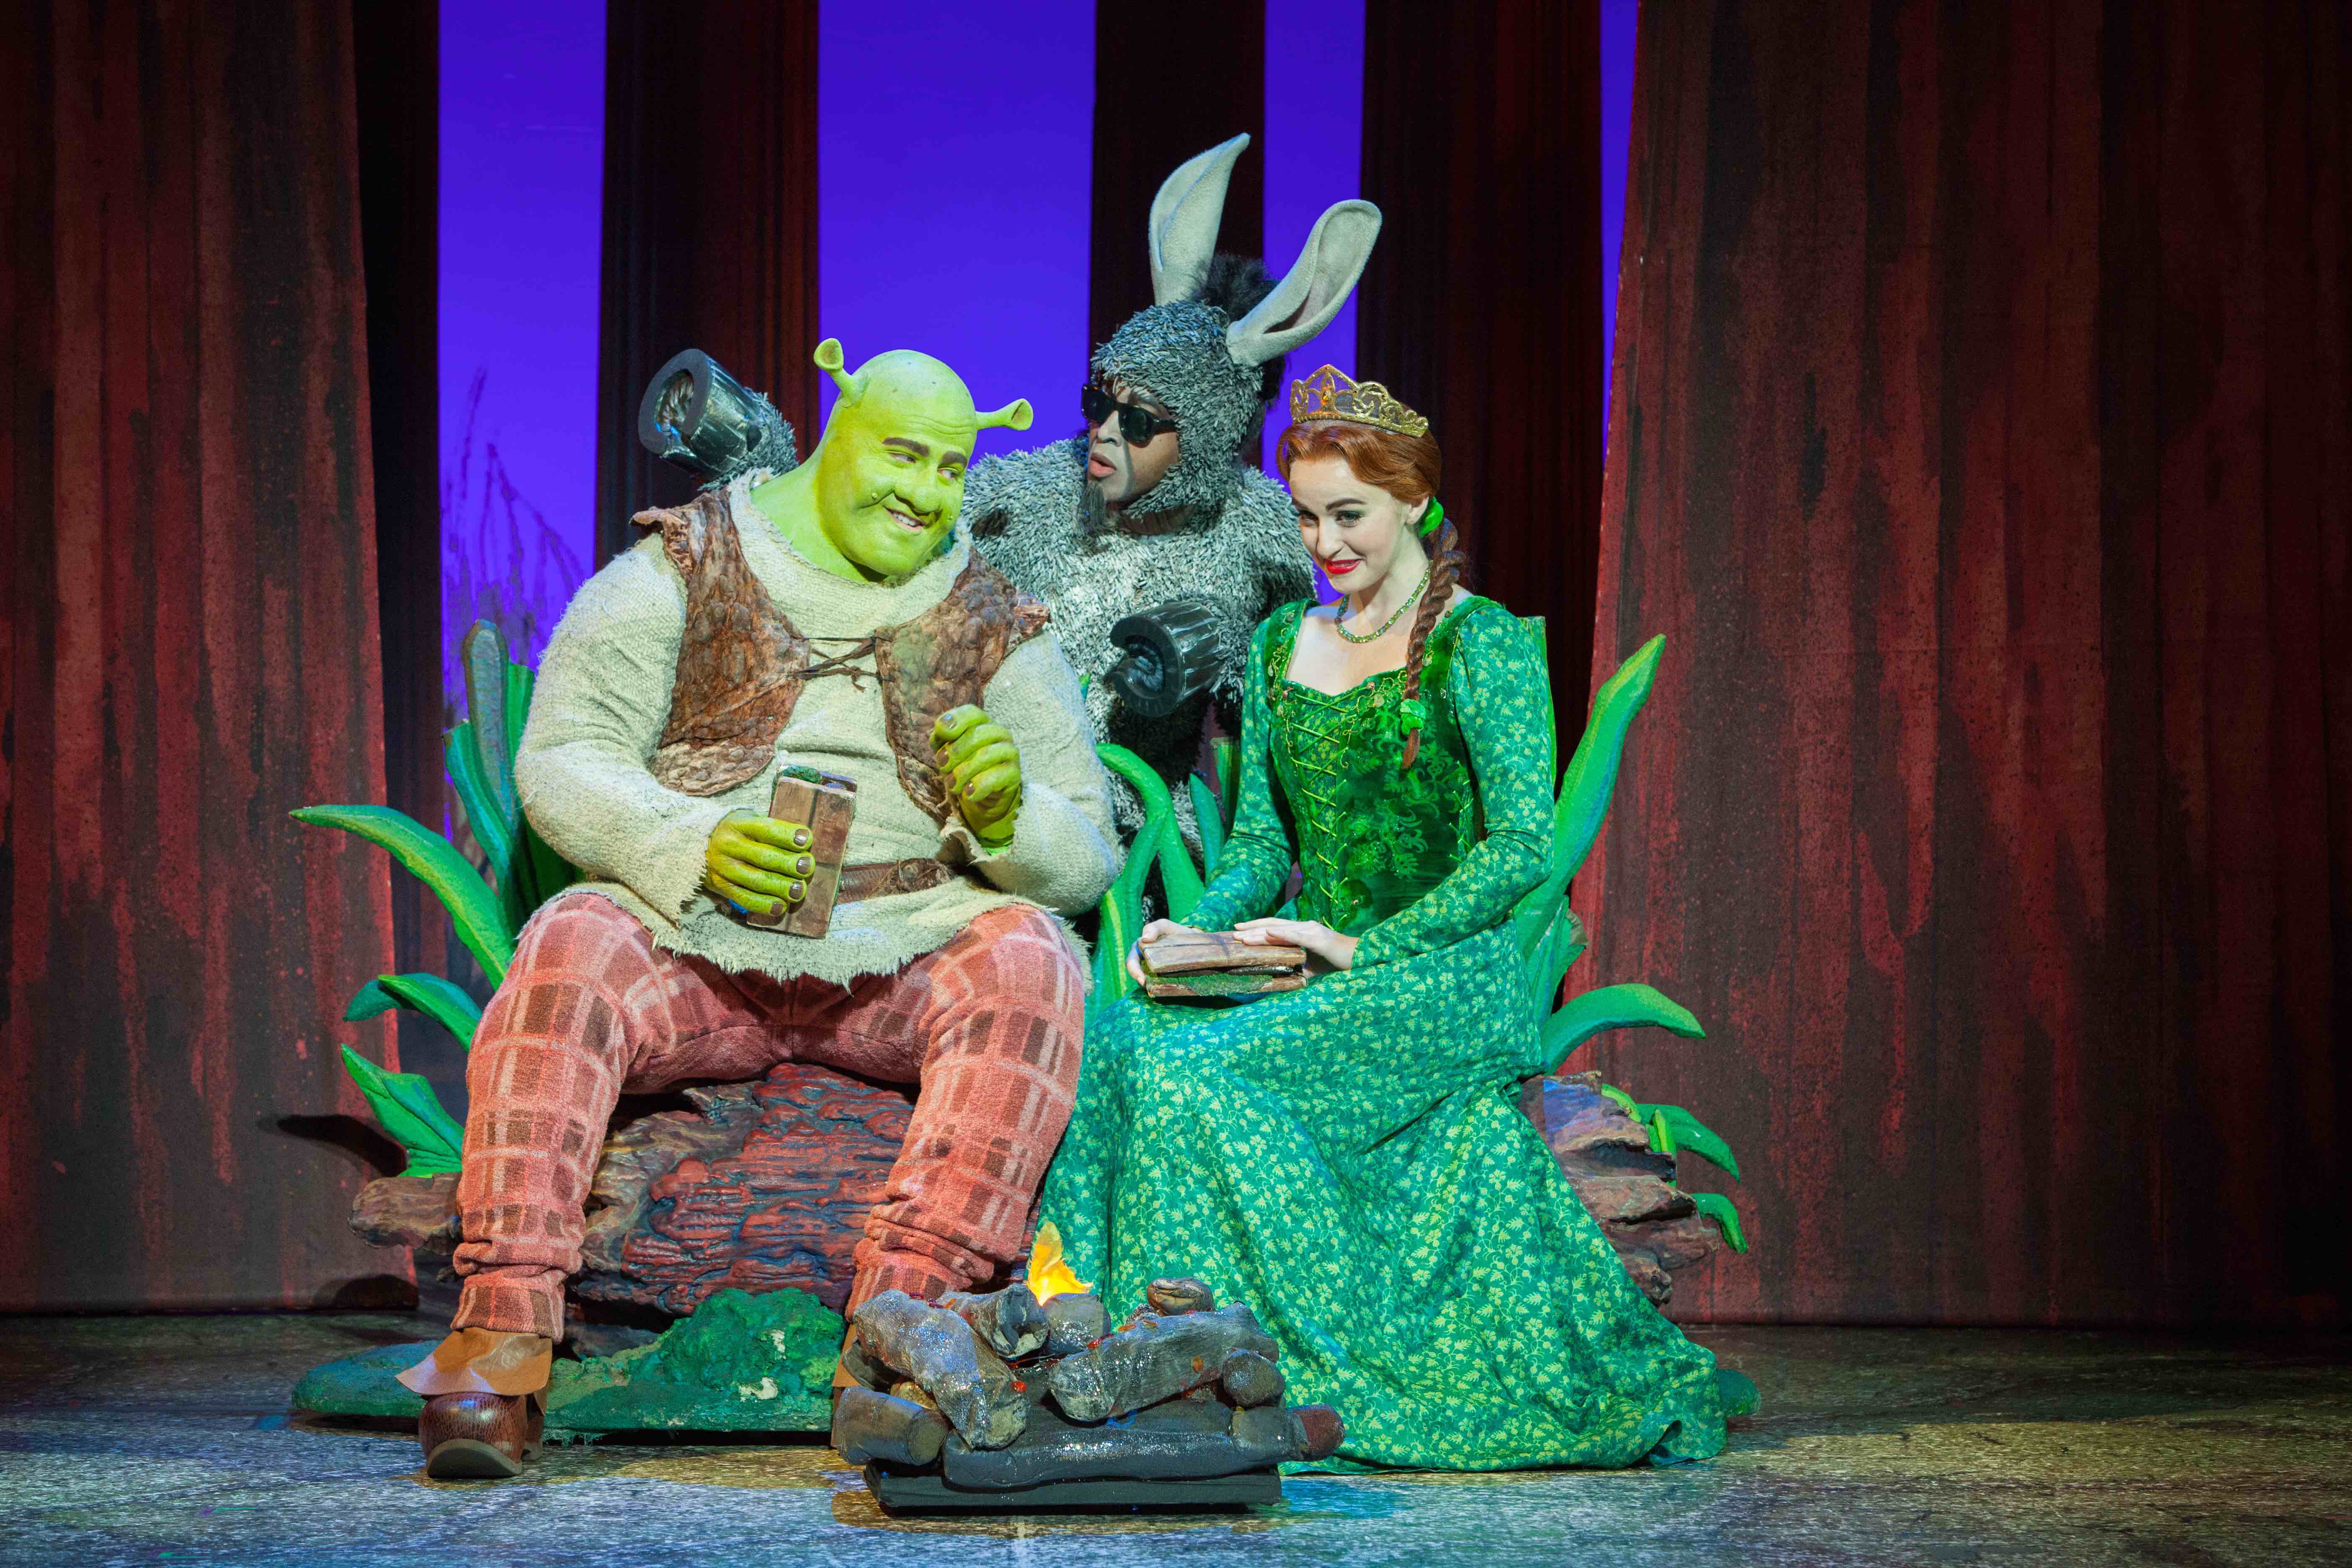 Make_A_Move_with_Perry_Sook_as_Shrek_ Jeremy_Gaston_as_Donkey_and_Whitney_Winfield_as_Fiona_L_vR